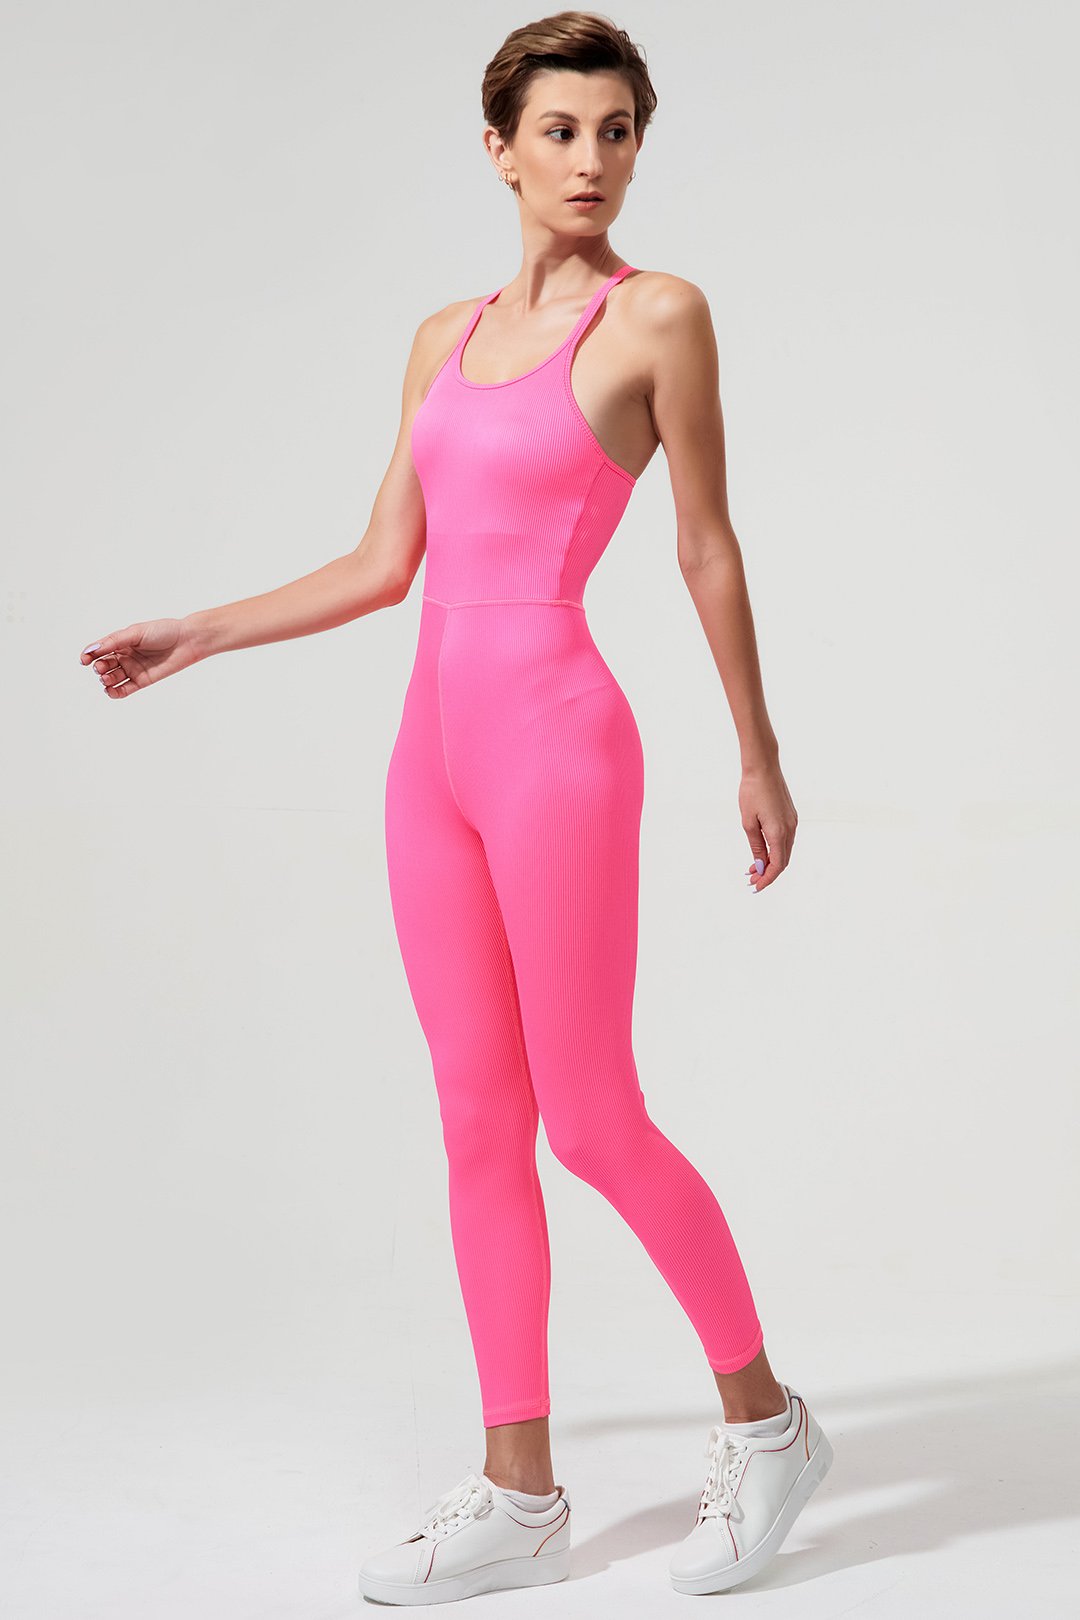 Stylish hot pink women's jumpsuit with a suave pulpa design - OW-0093-WJU-PK_2.jpg